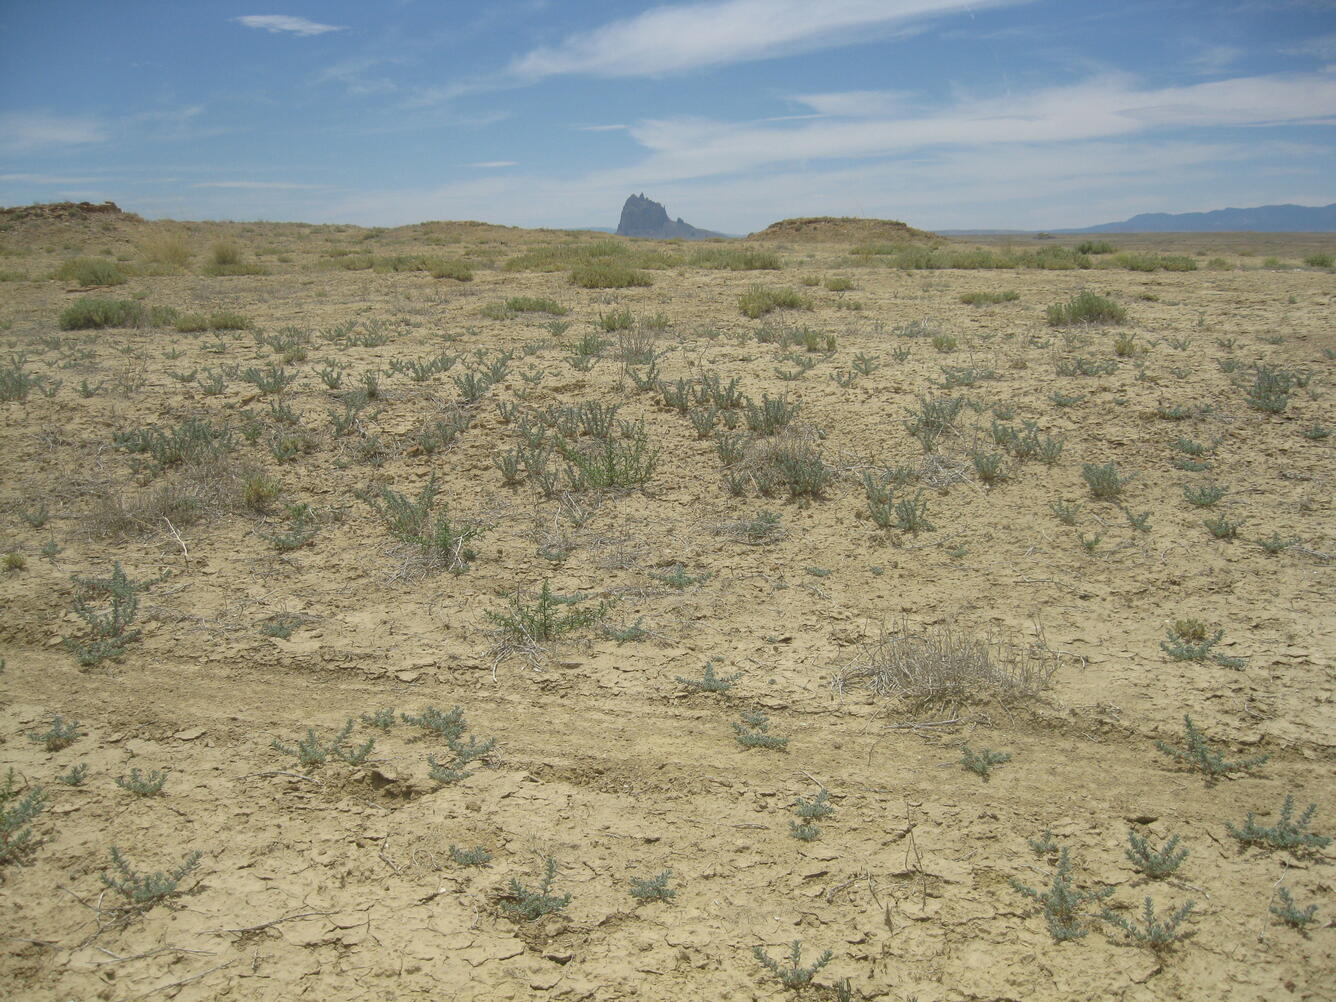 Volcanic remnant Shiprock as seen from the Many Devils Wash arroyo near Shiprock, New Mexico.